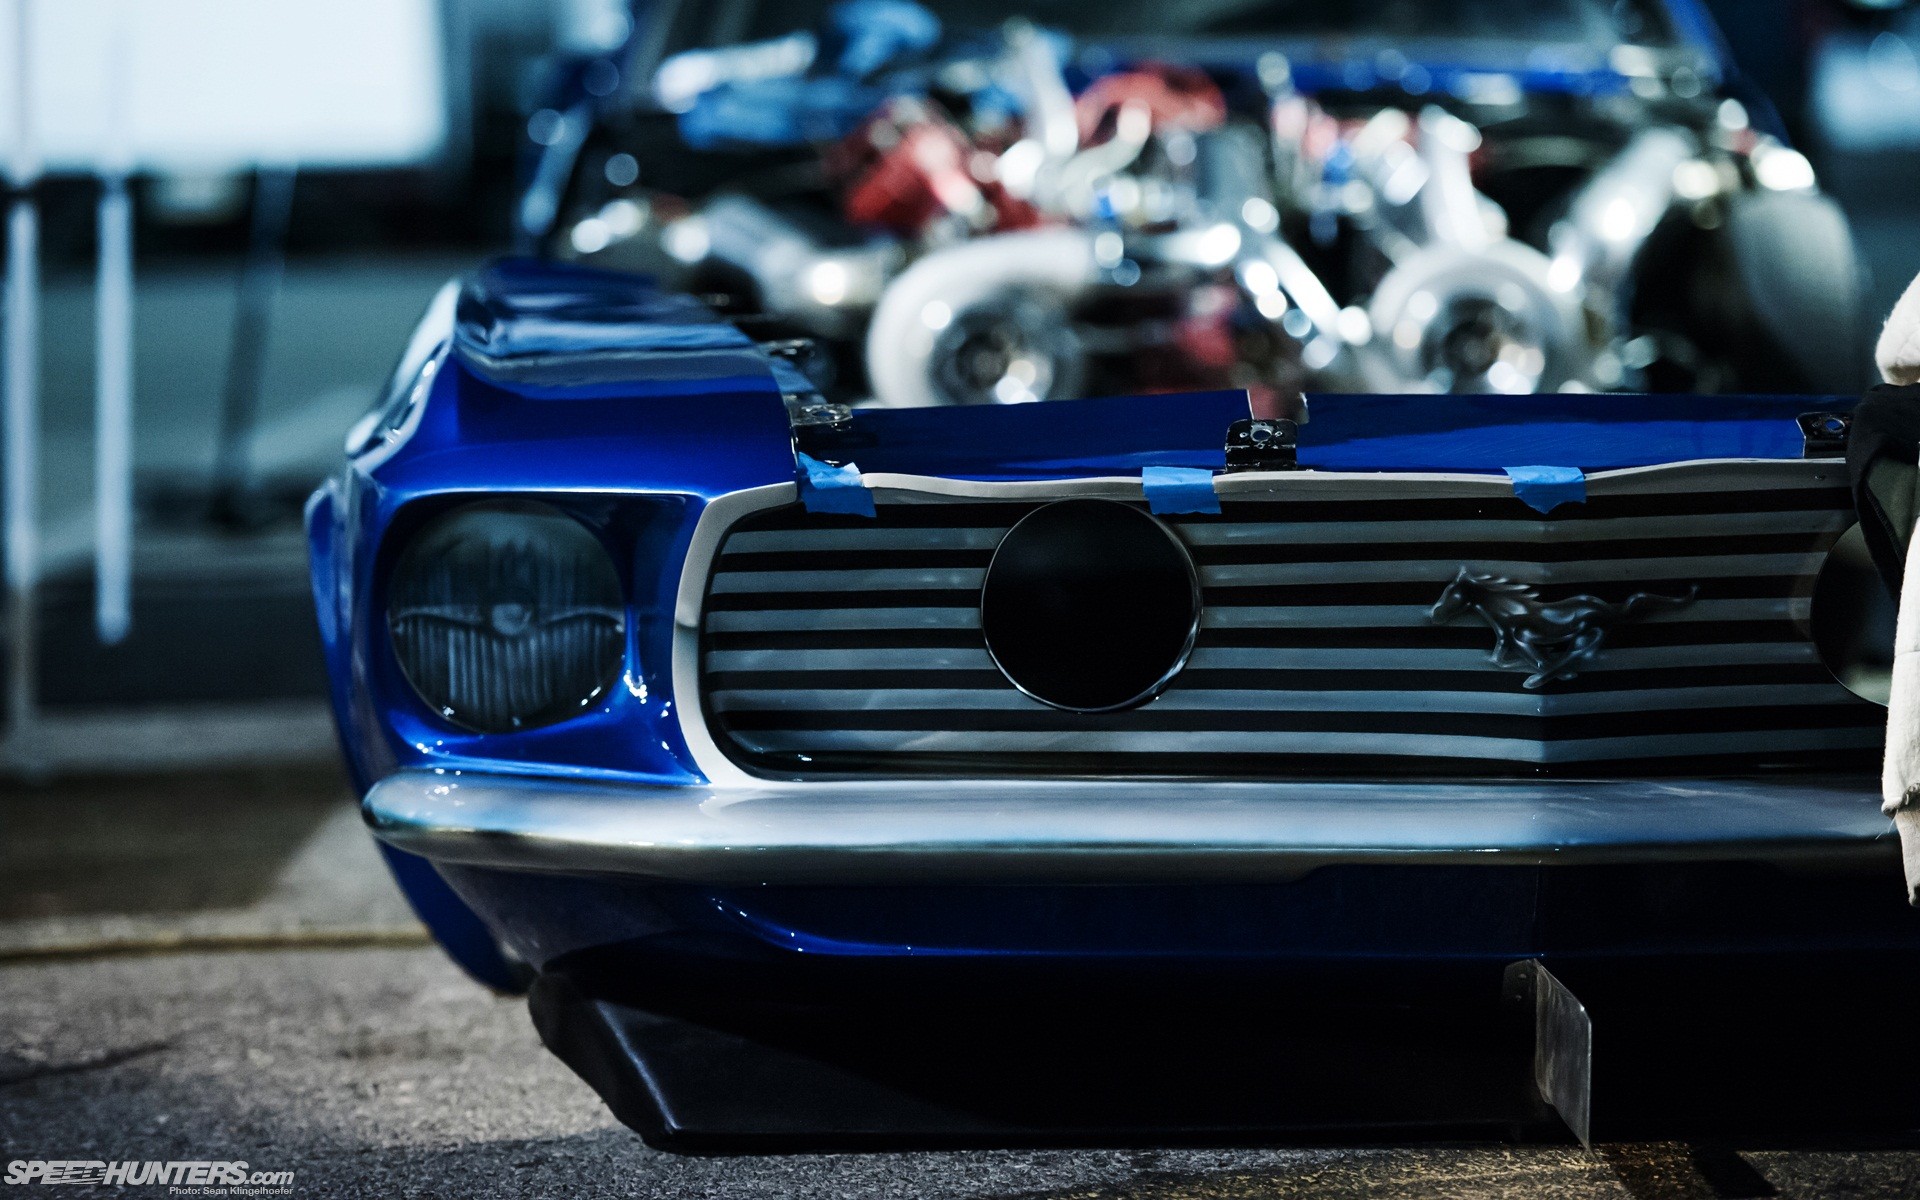 speddhunters, Ford, Mustang, Shelby, Vehicle, Cars, Hot, Rod, Muscle, Engine, Nitro, Turbo, Front, Blue, Chrome, Drag, Racing, Race Wallpaper